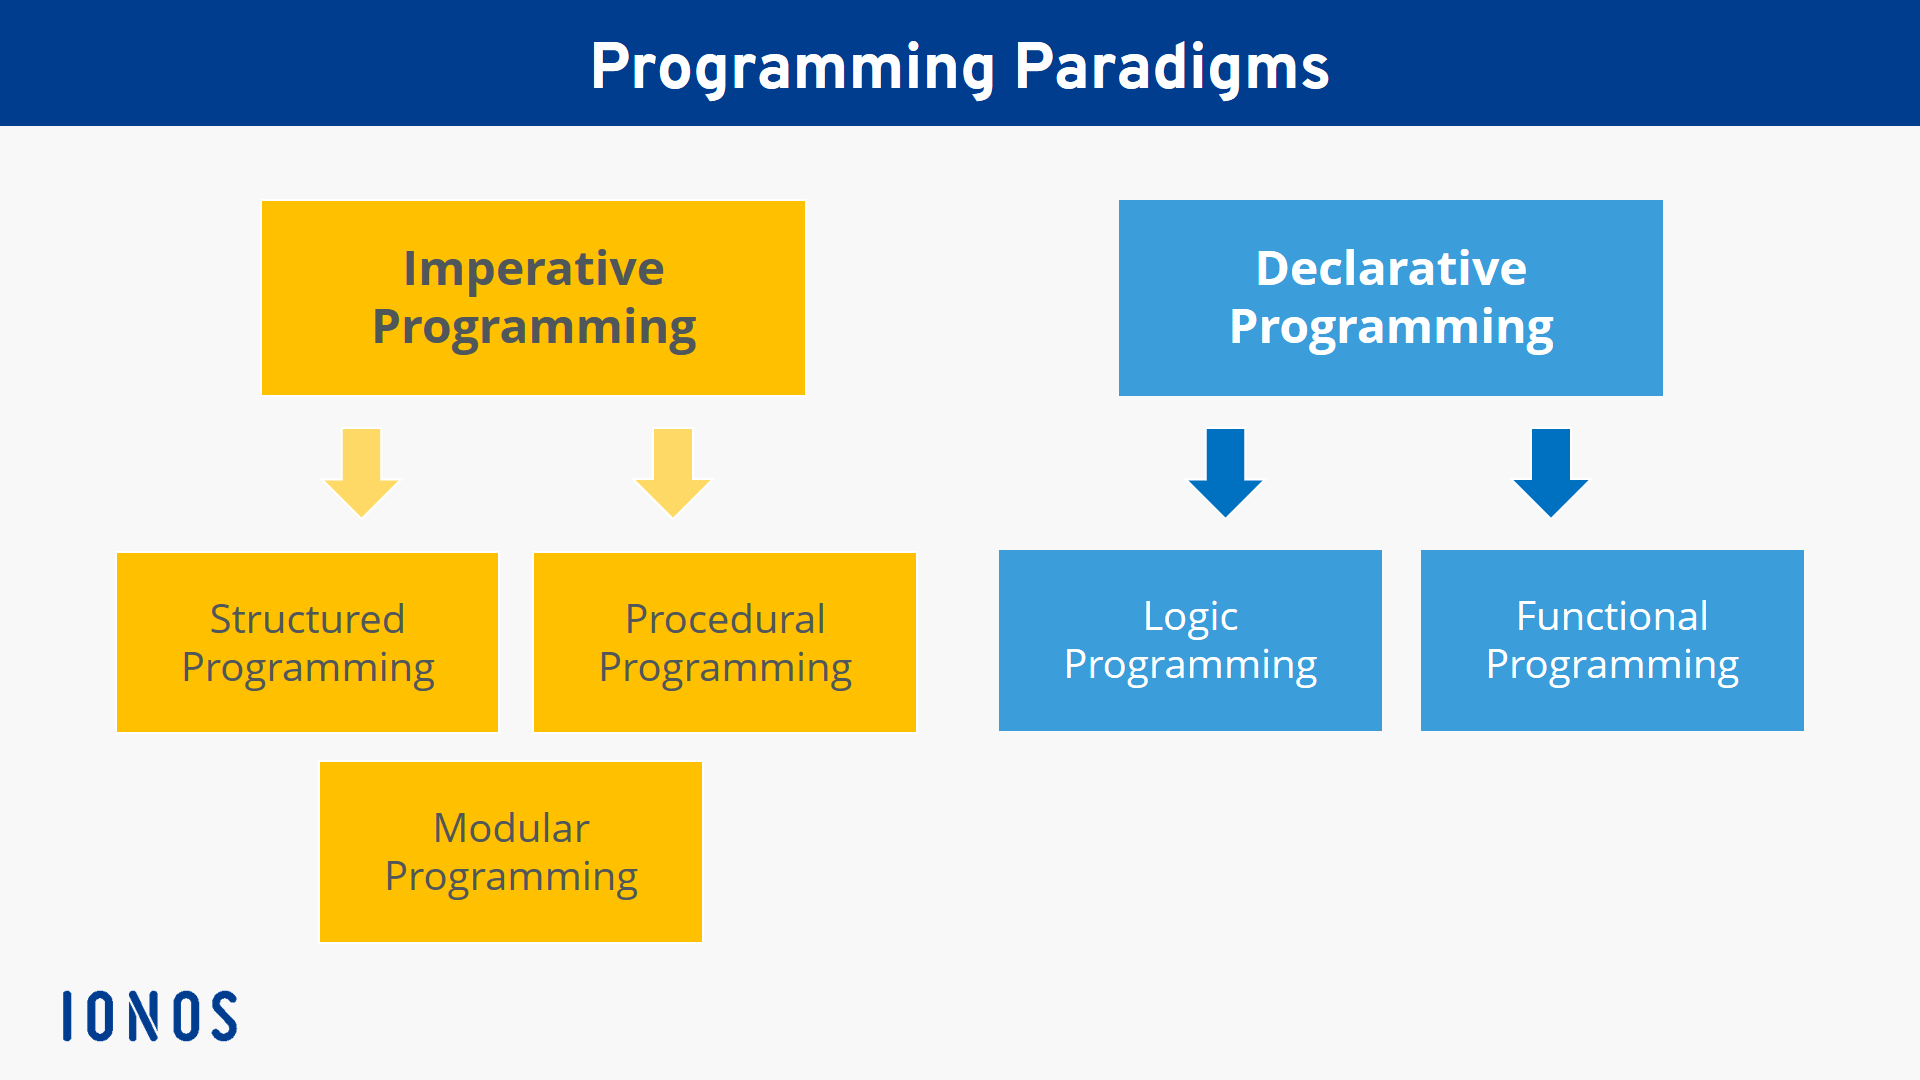 Overview of the systematization of imperative and declarative programming